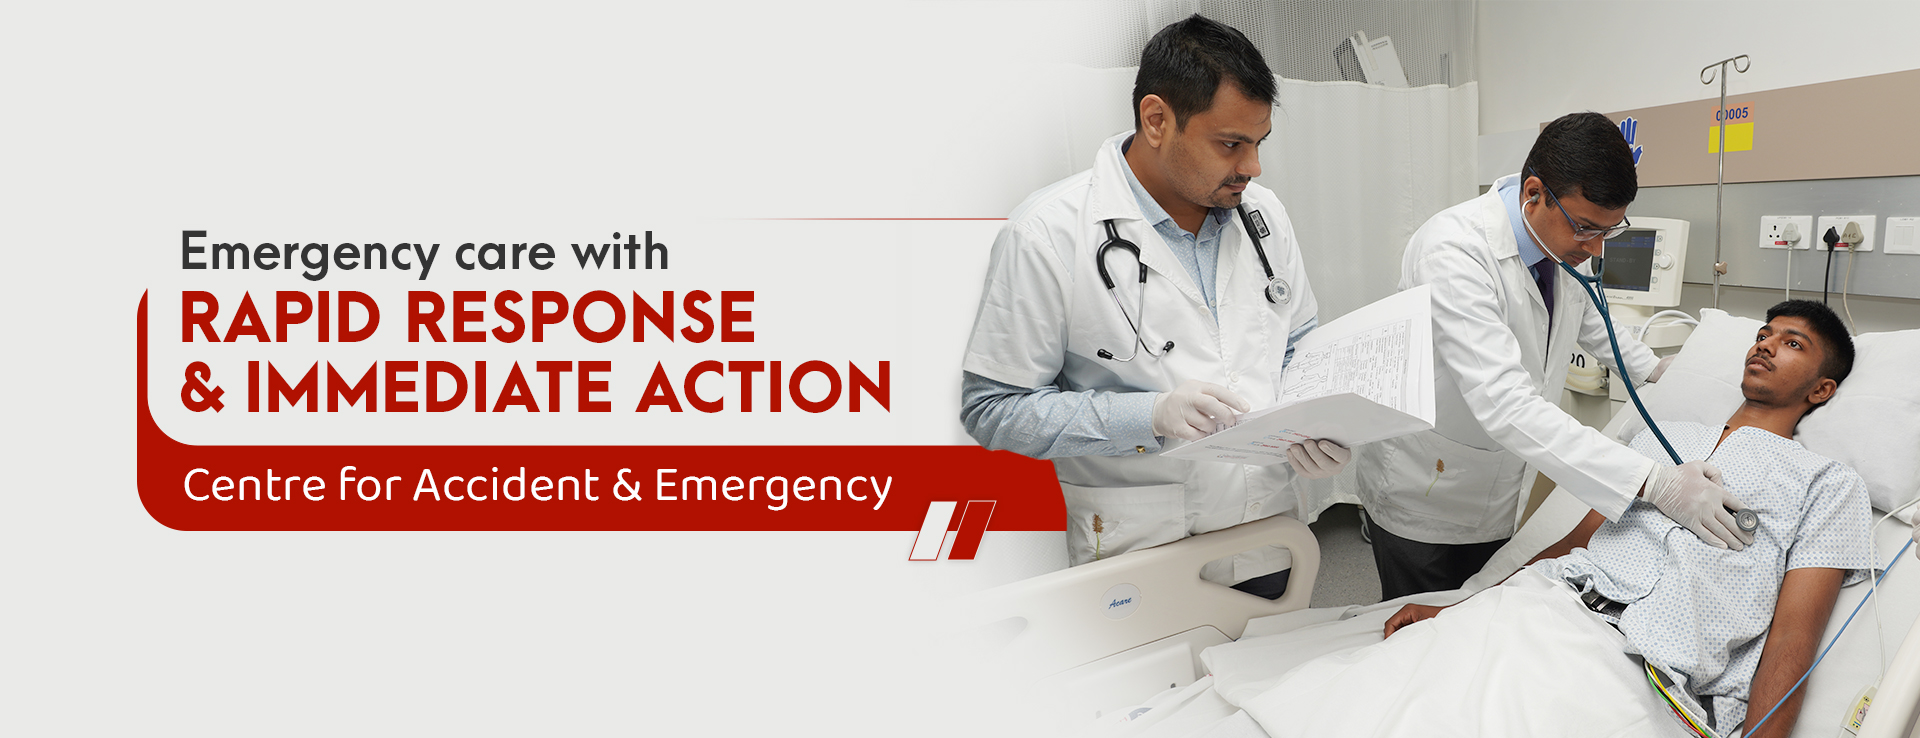 Emergency care with Rapid Response & Immediate Action